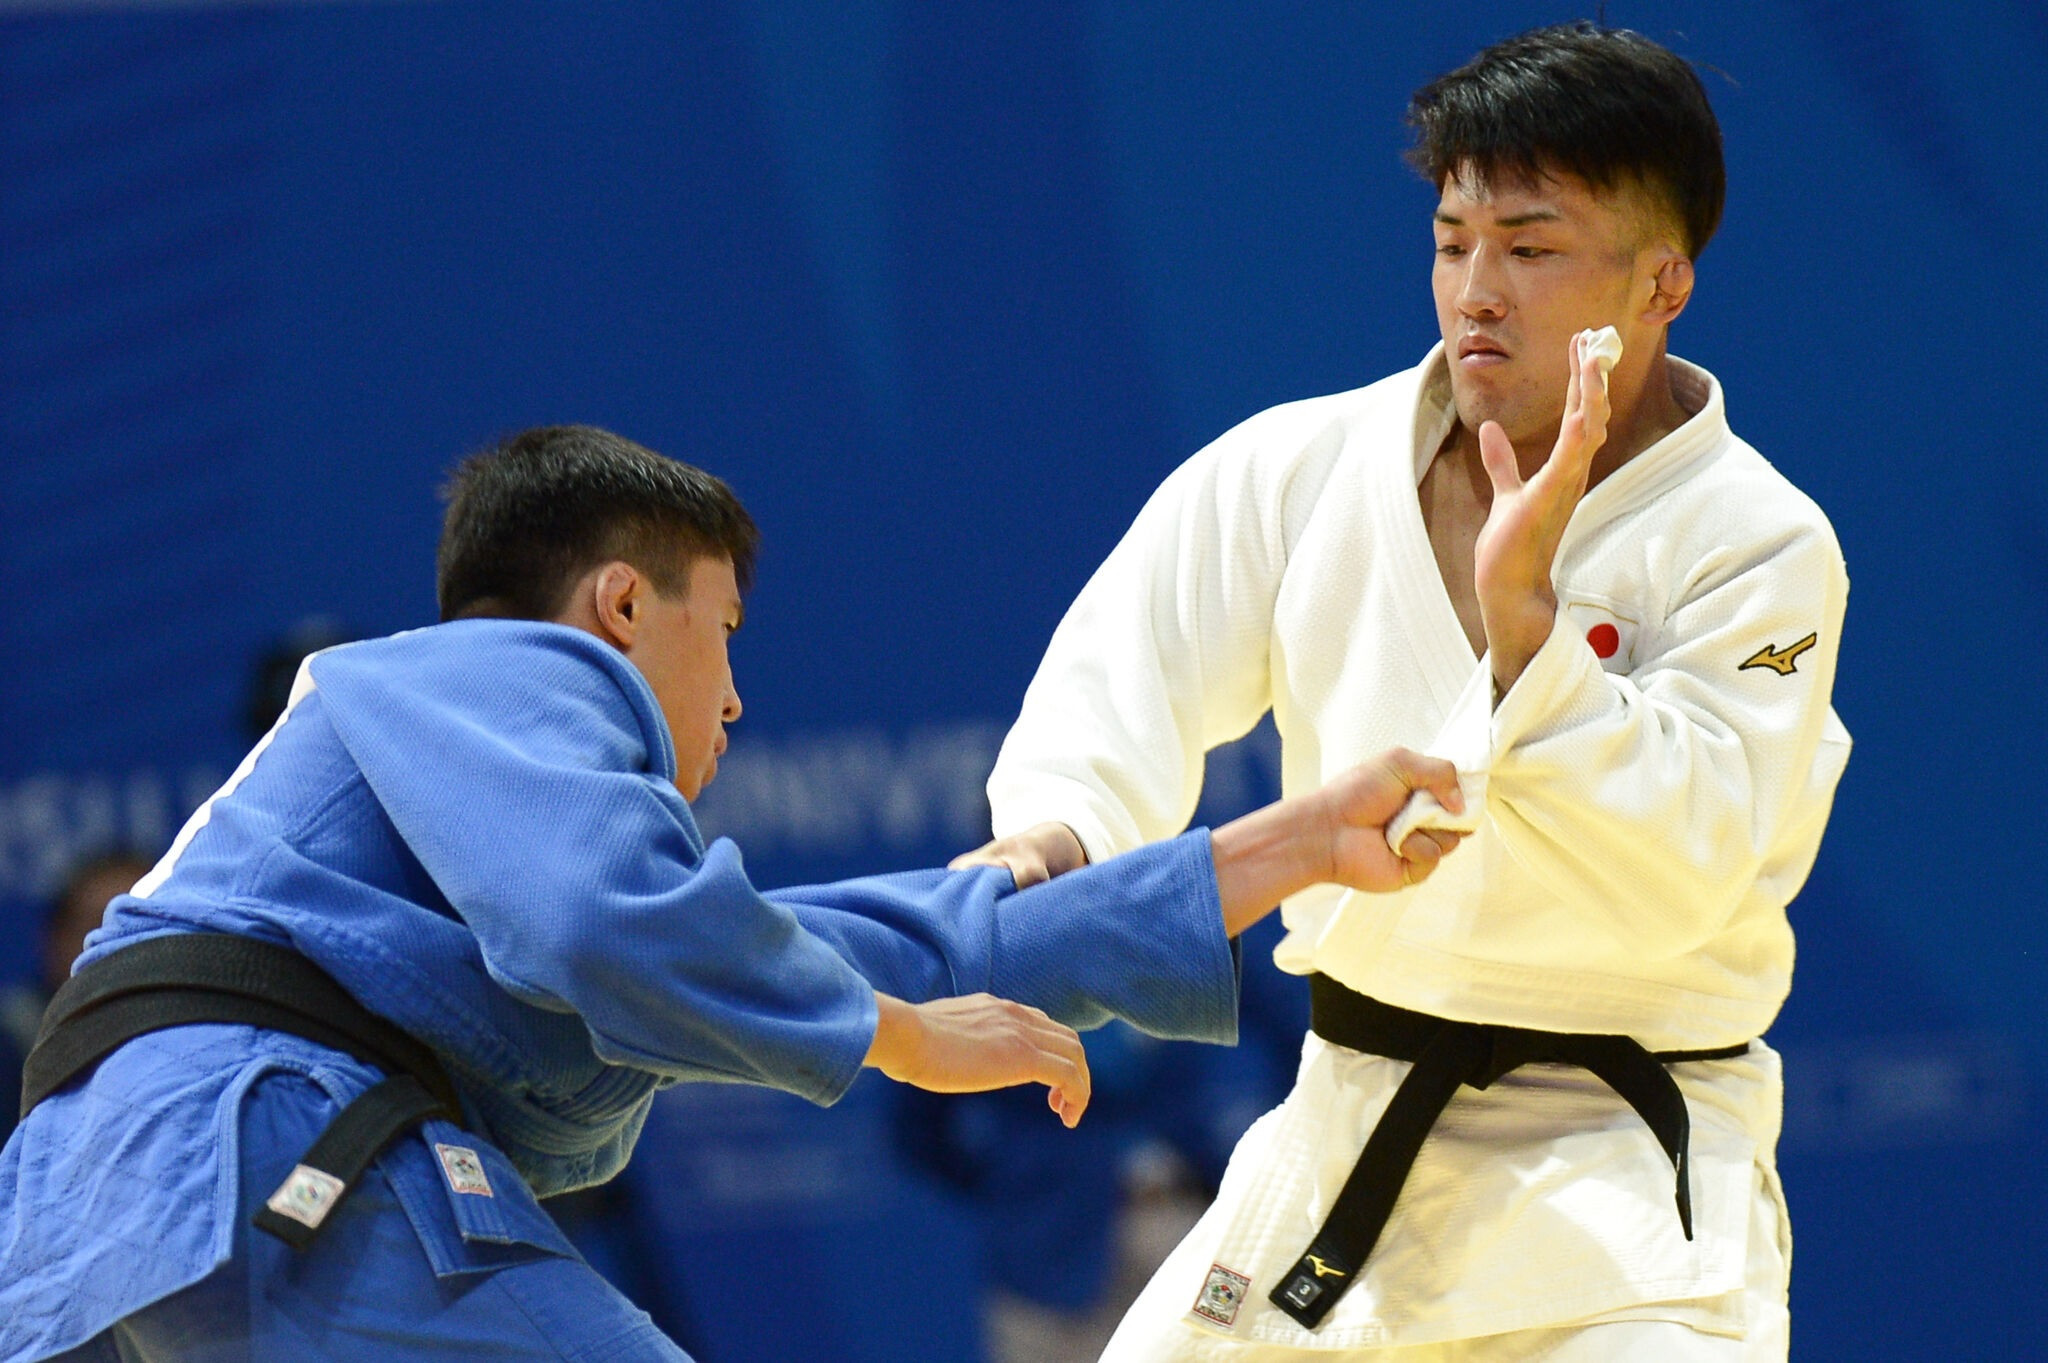 Japan win all four judo golds at Chengdu 2021 as hosts China bag wushu hat-trick